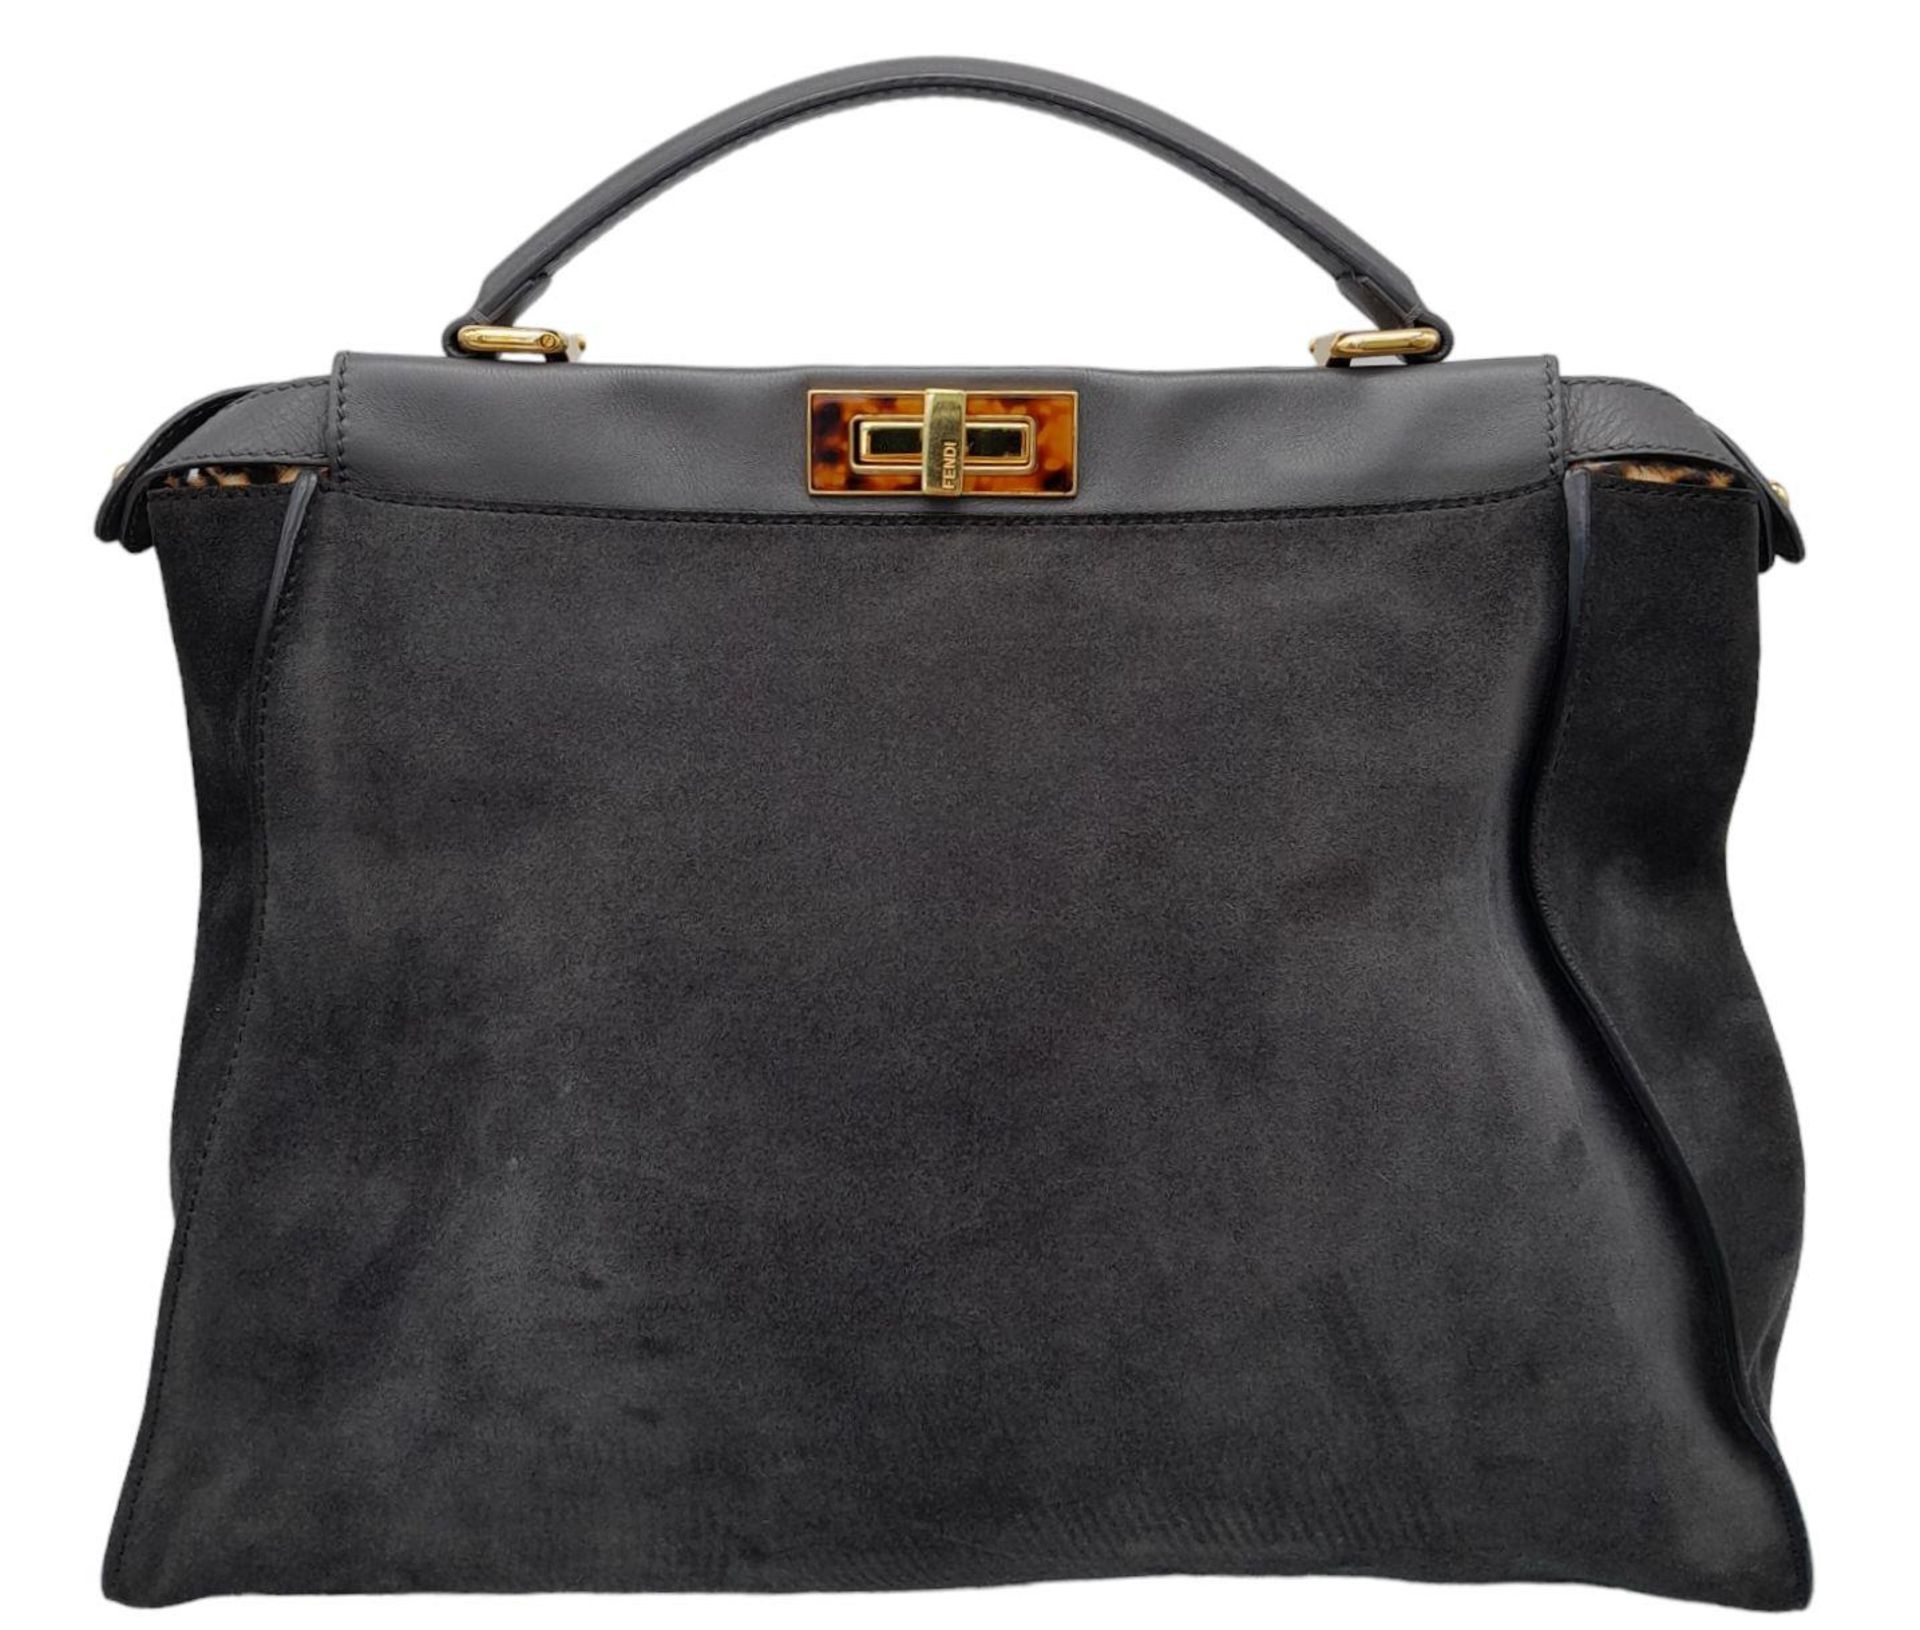 A Fendi Grey Peekaboo Bag. Suede exterior with leather trim, single leather handle, gold-toned - Bild 2 aus 9